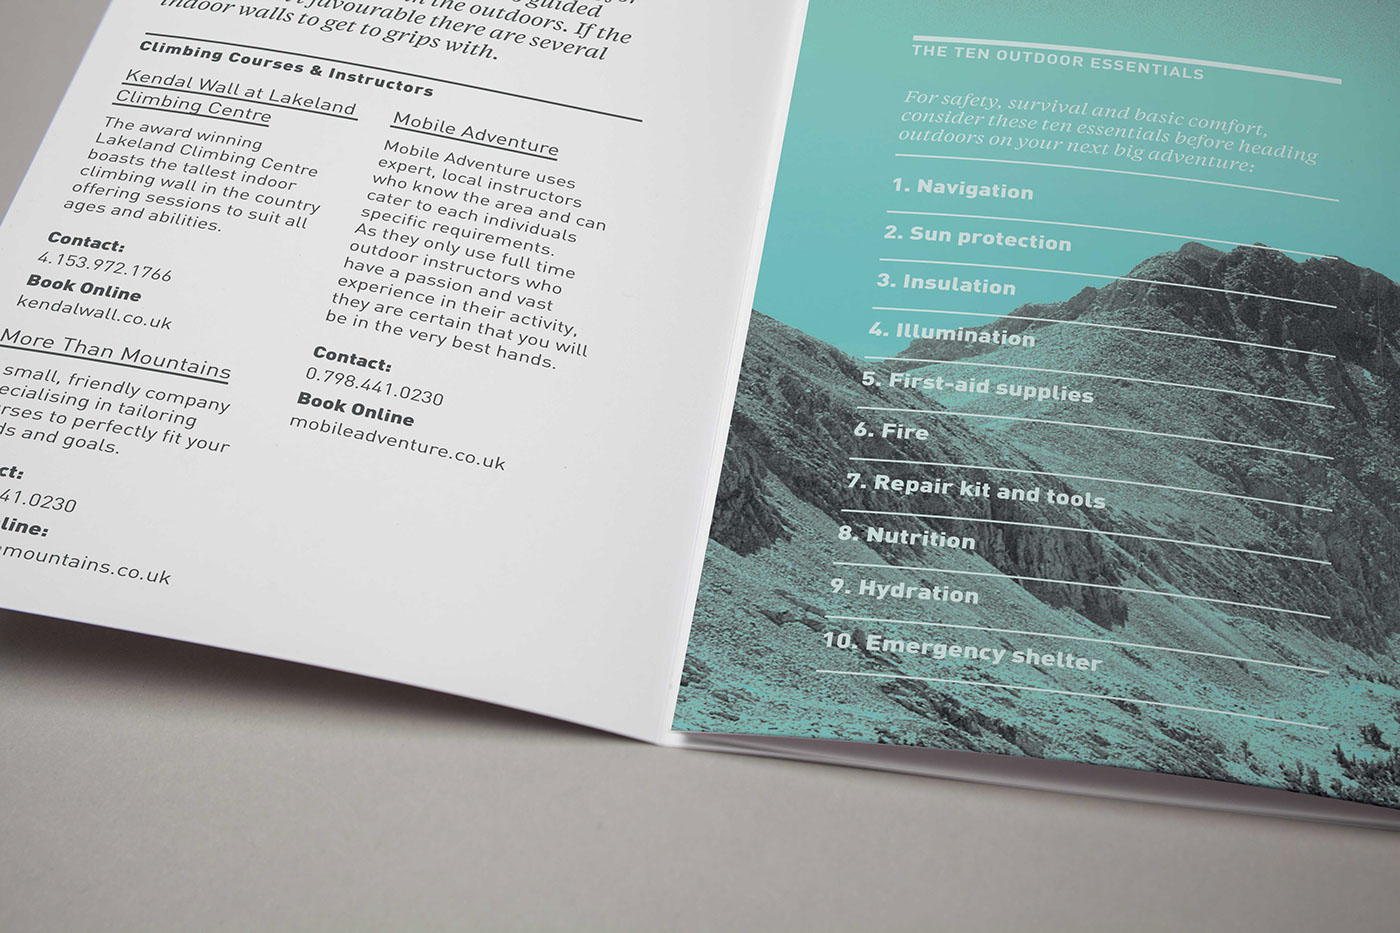 brochure trifold